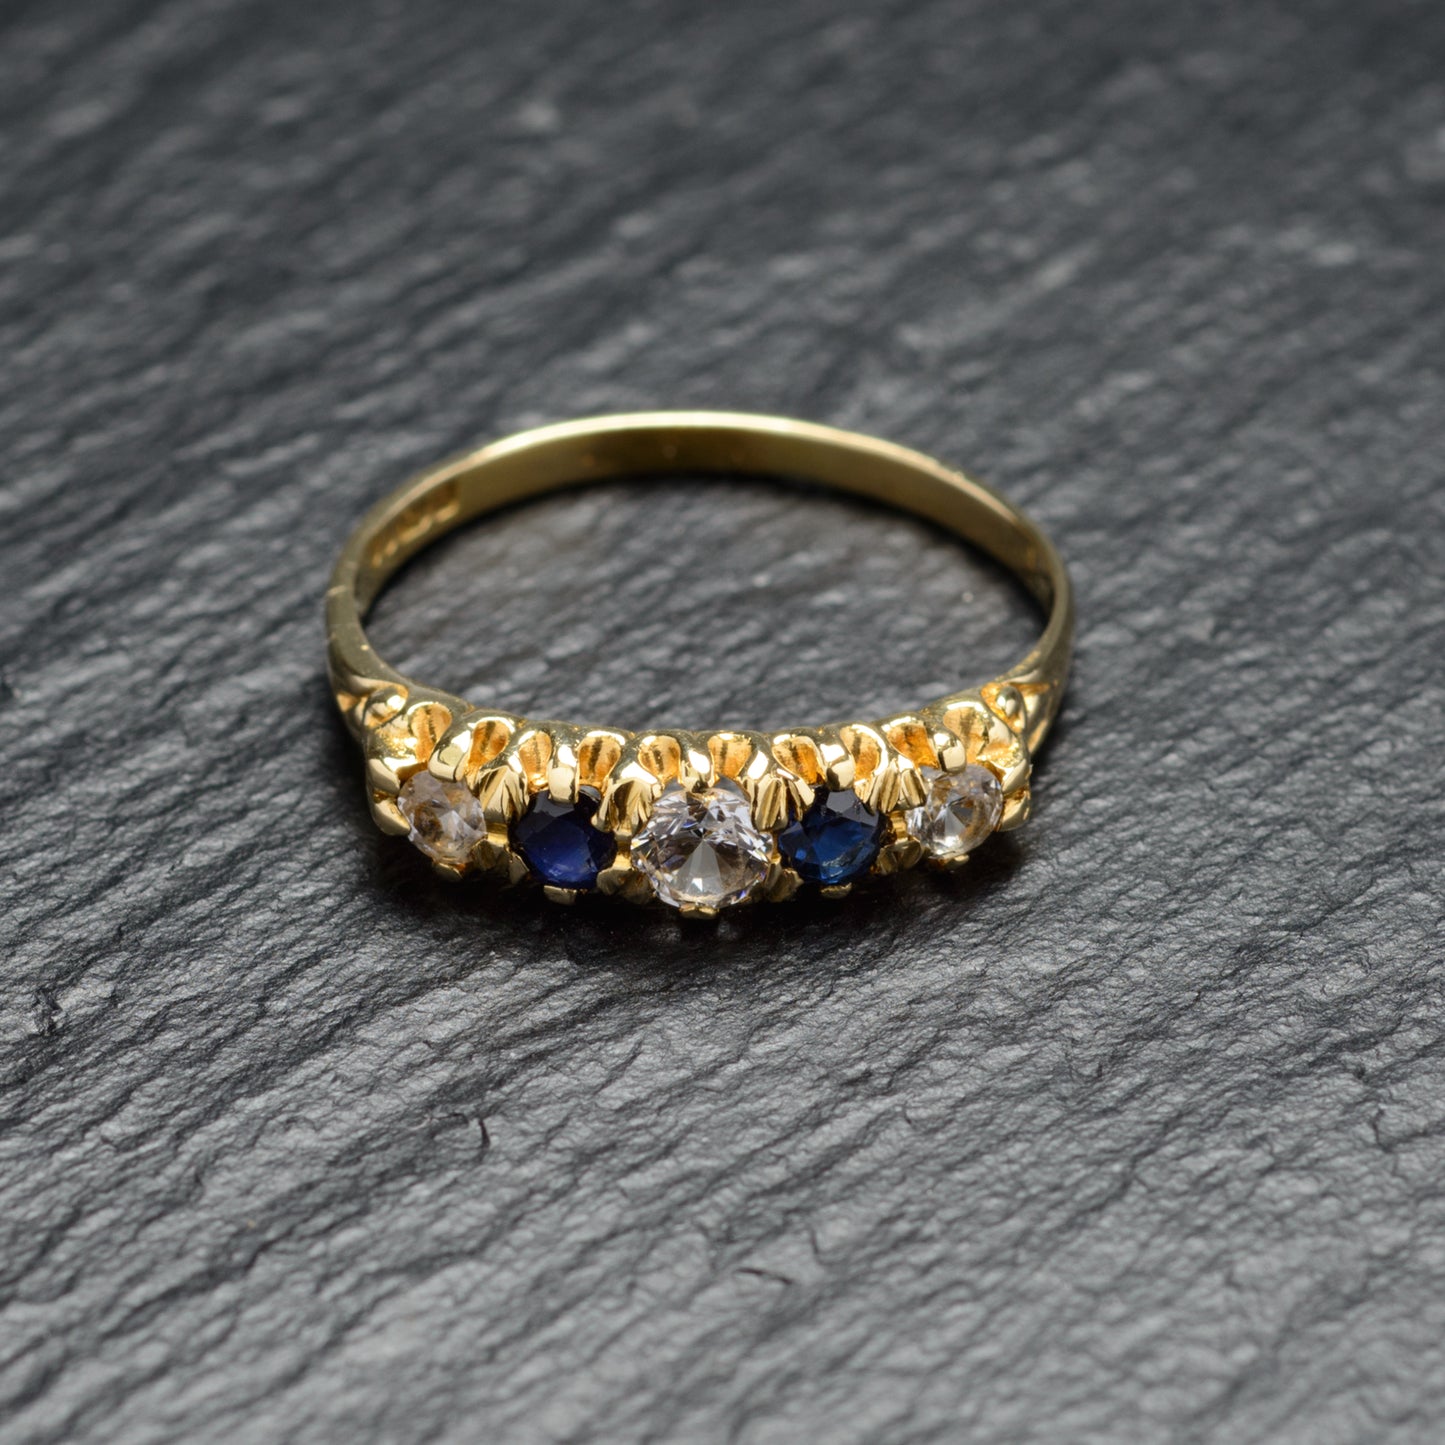 Vintage 18ct Gold Ring With Sapphire & White Spinel Gemstones H'mark London 1982 (A744)